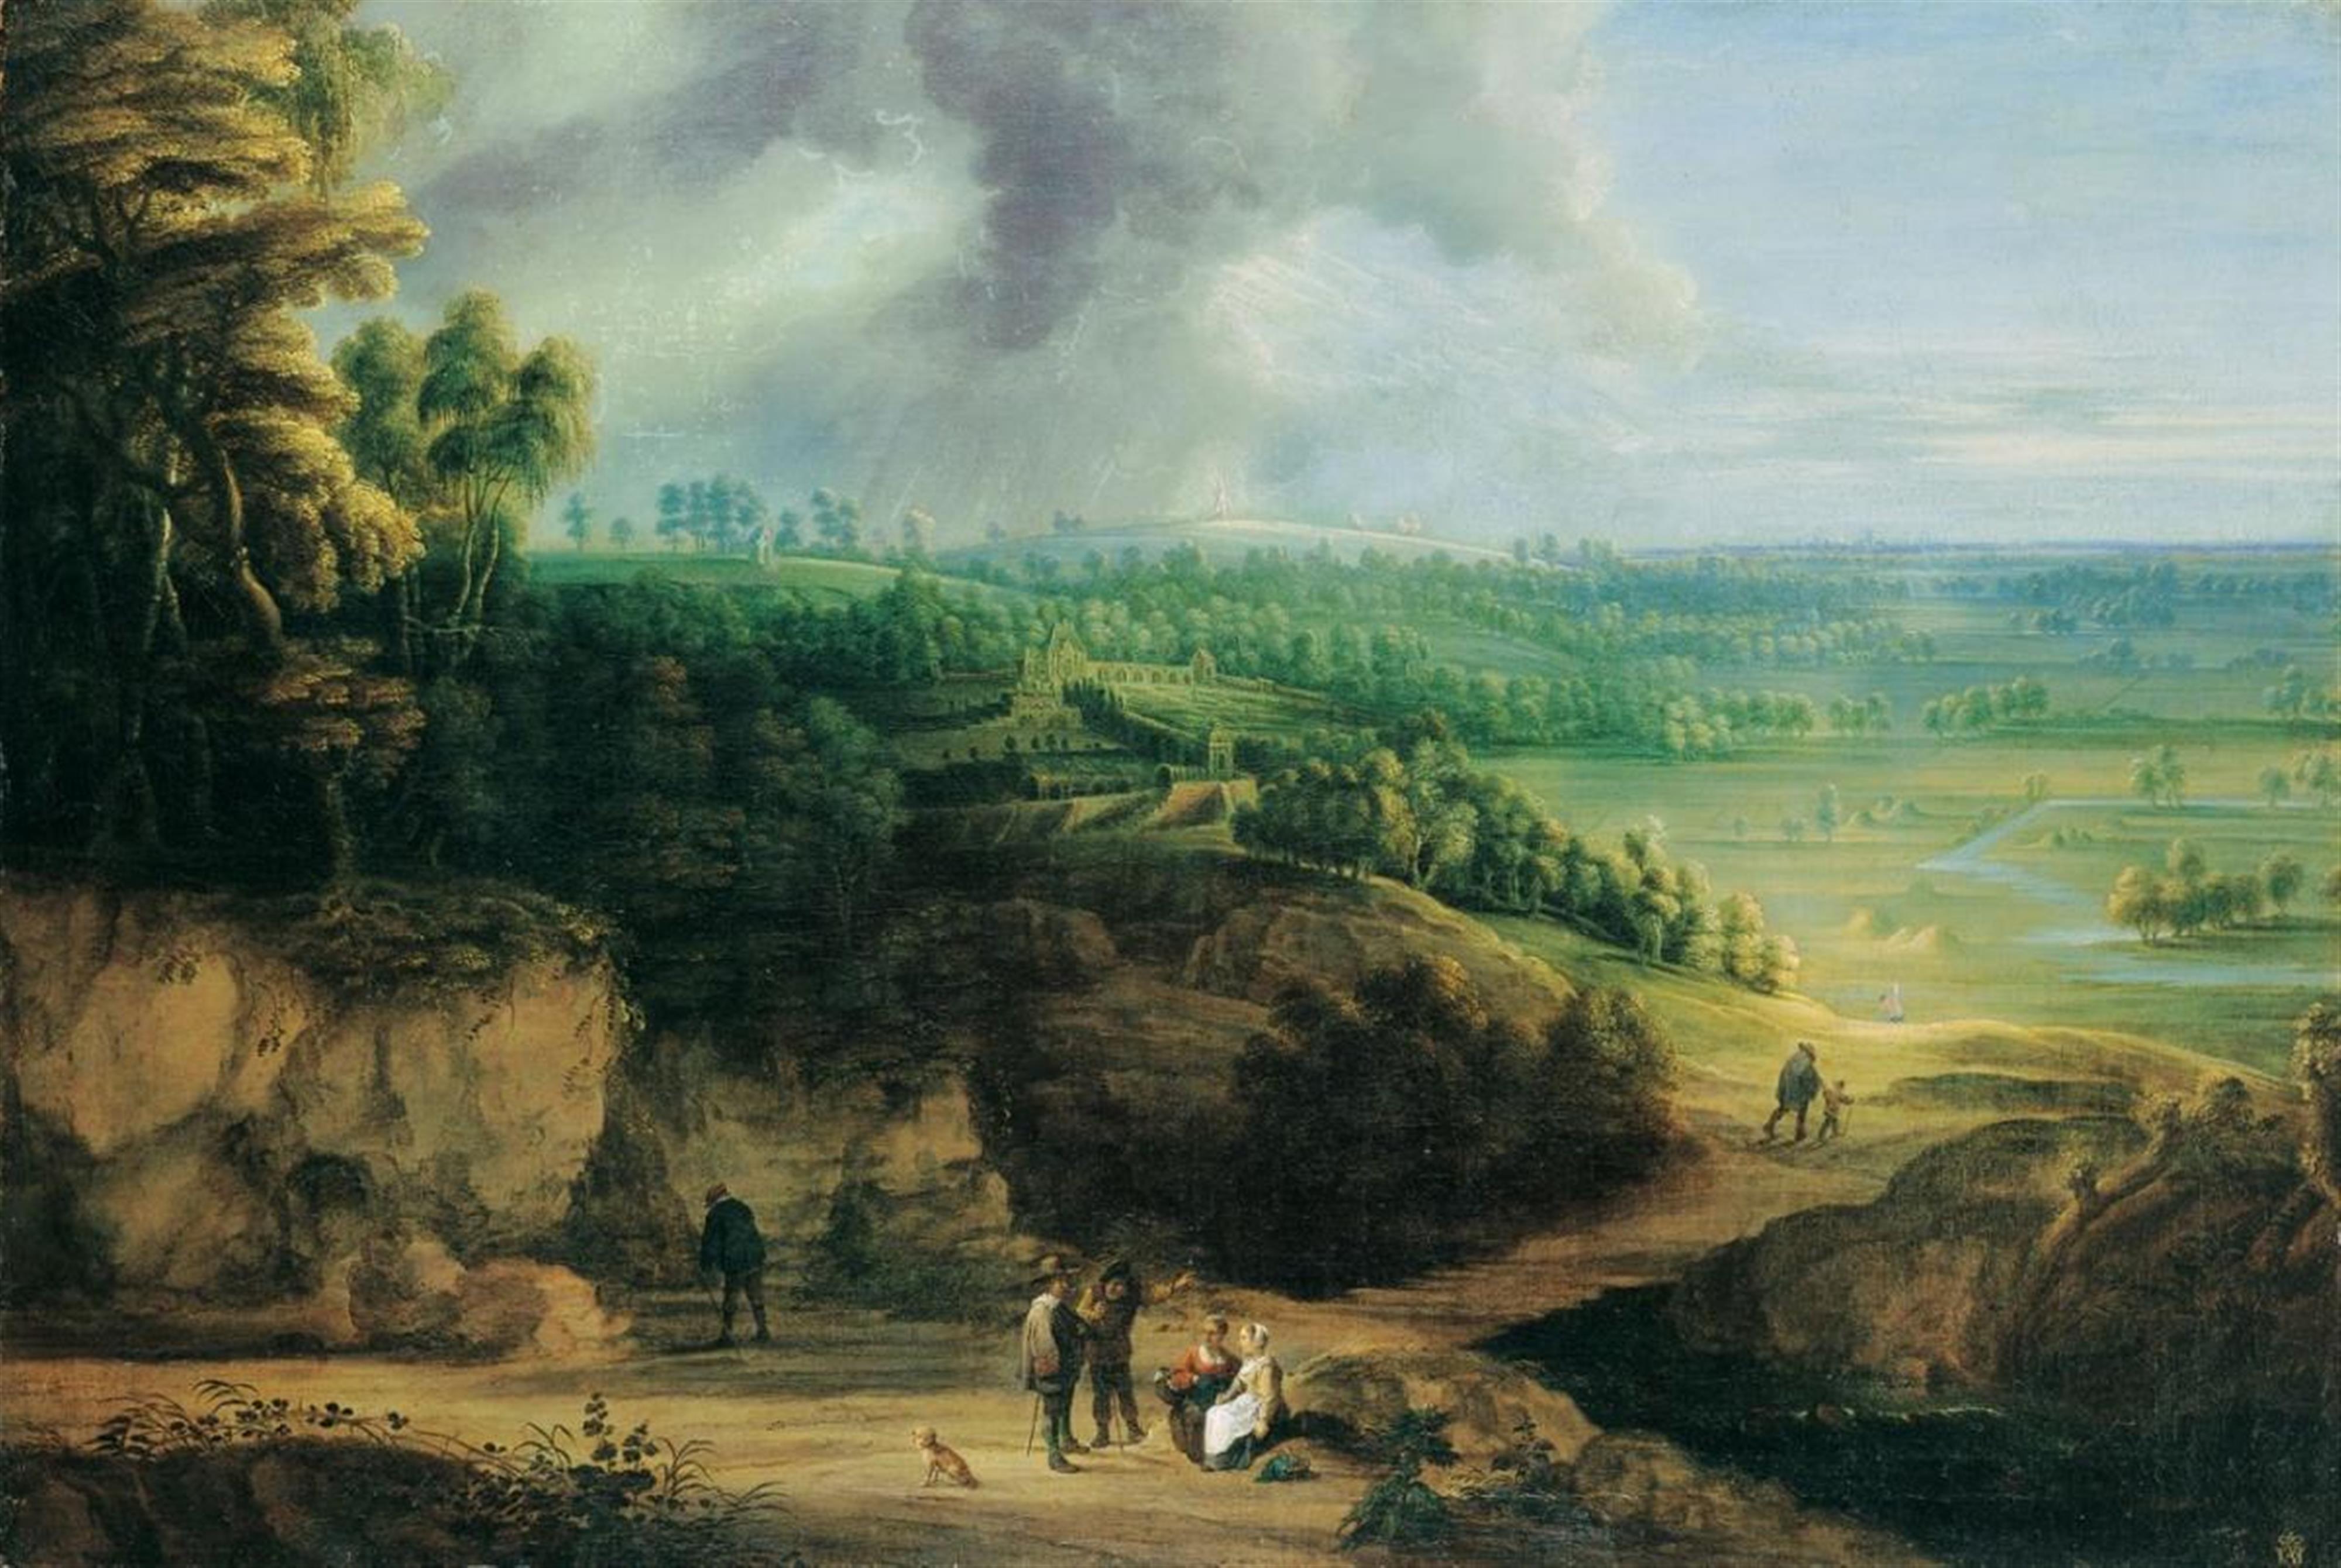 Lucas van Uden and DAVID TENIERS THE YOUNGER - PANORAMIC LANDSCAPE WITH CASTLE AND FIGURES